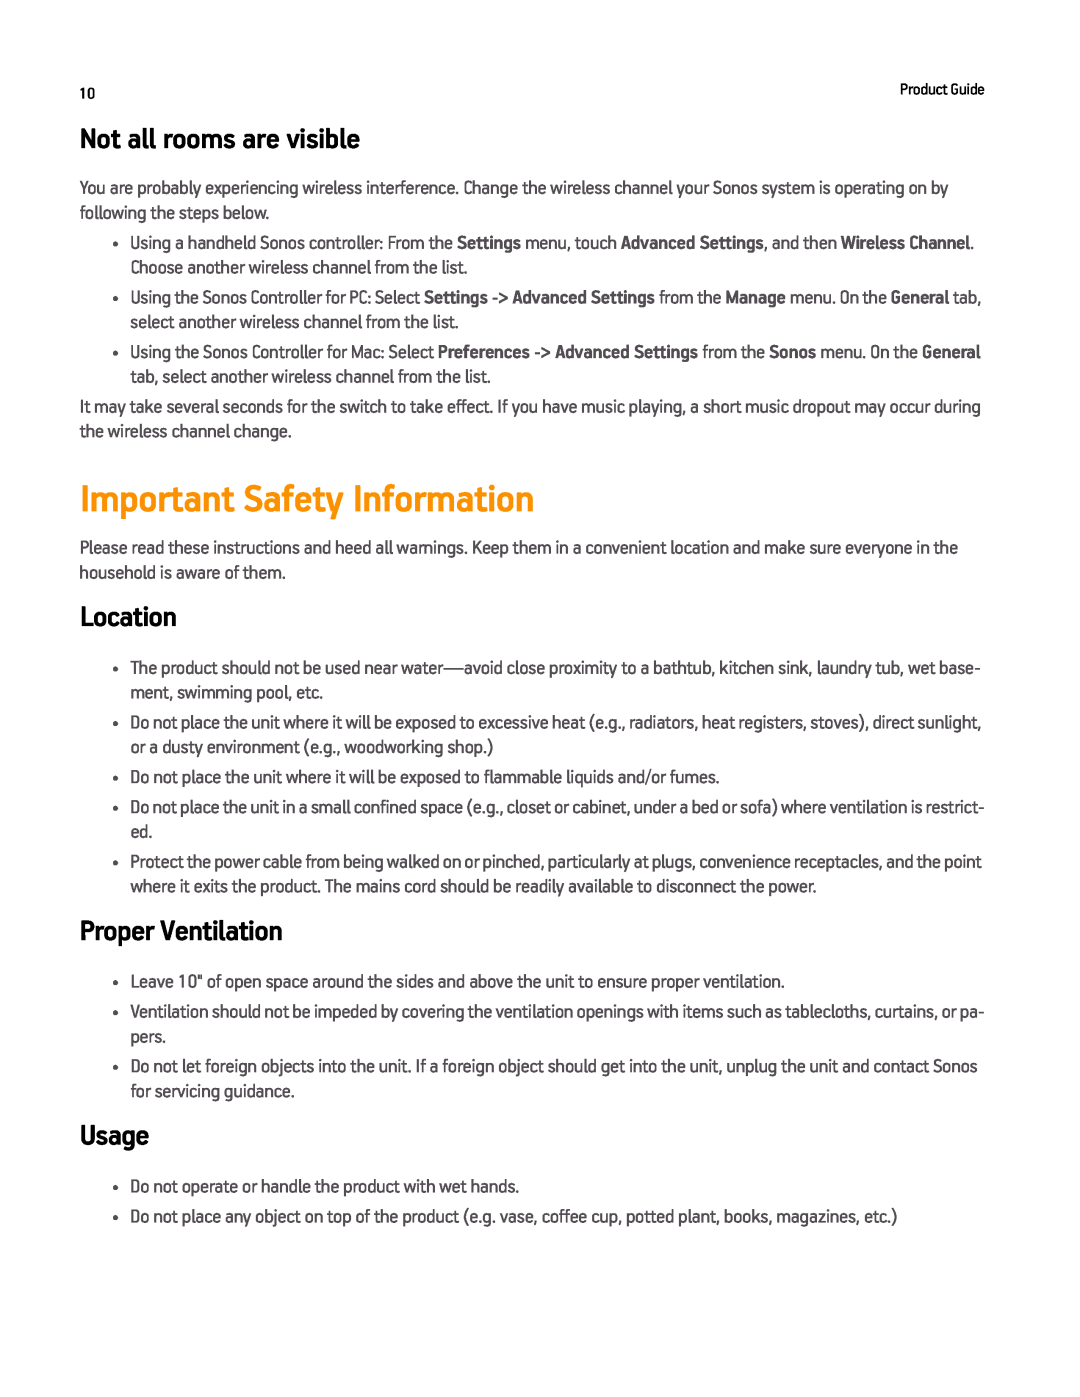 Sonos CONNECTAMP manual Important Safety Information, Not all rooms are visible, Location, Proper Ventilation, Usage 